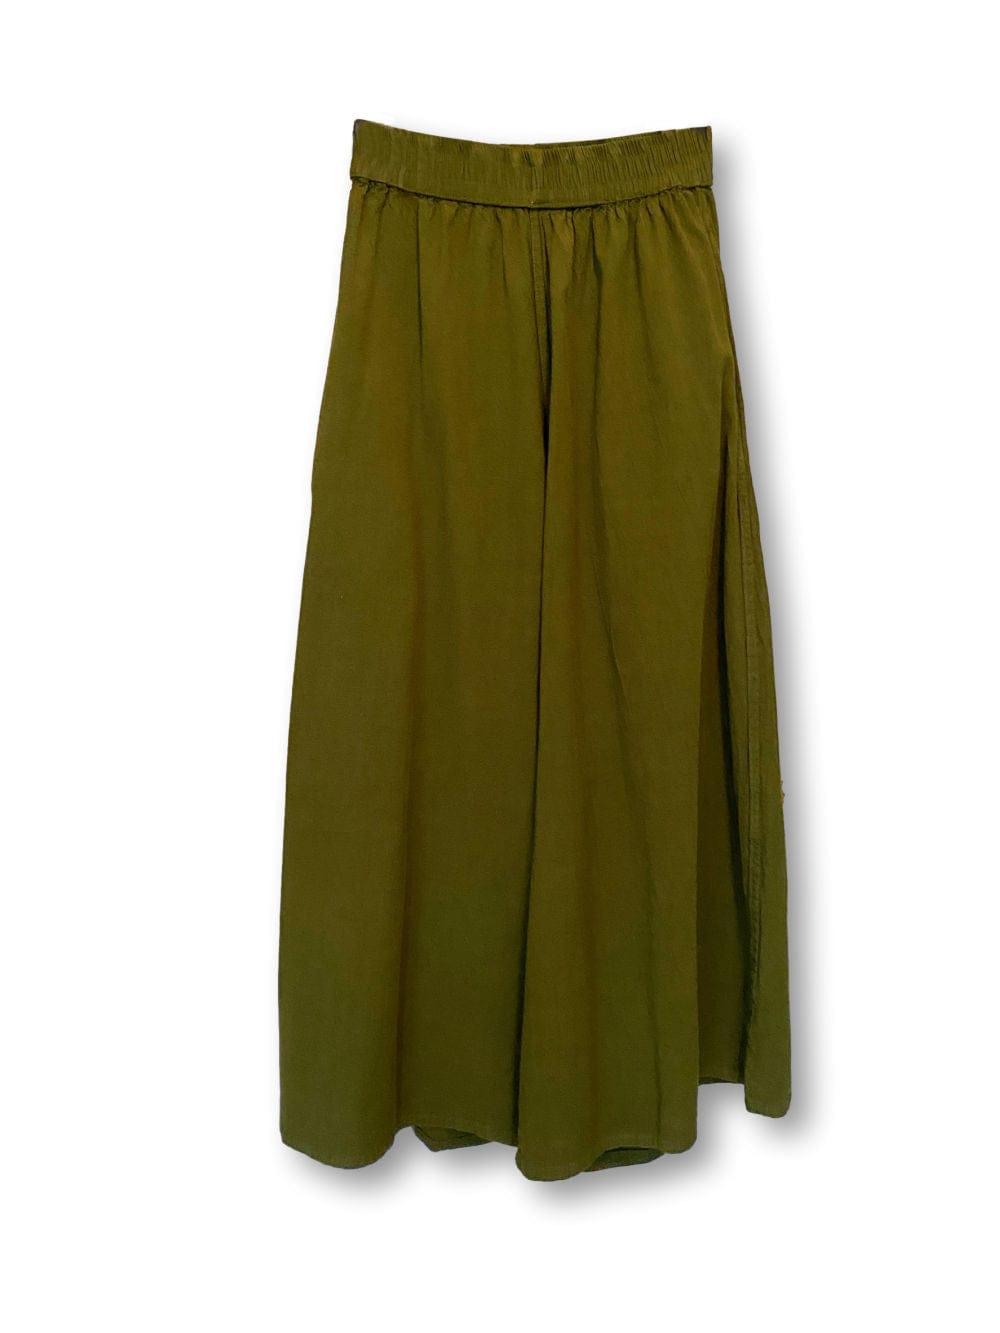 Dark Green Cotton Palazzo Pant with elastic waist and two side seam pockets.